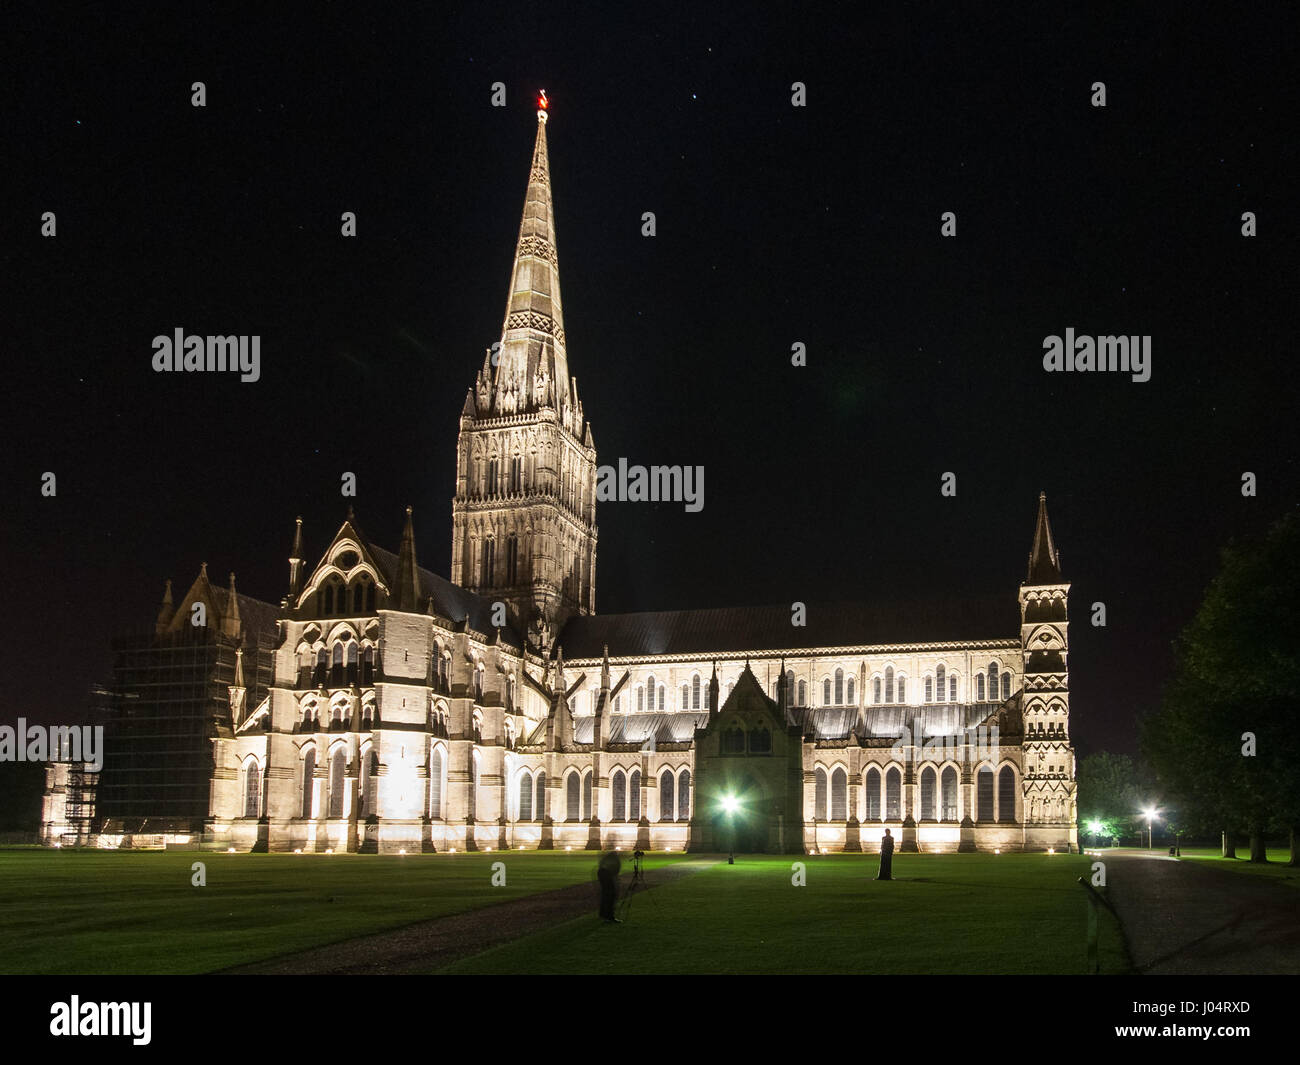 Salisbury, England, UK - August 18, 2012: The mediaeval cathedral at Salisbury in Wiltshire. Stock Photo